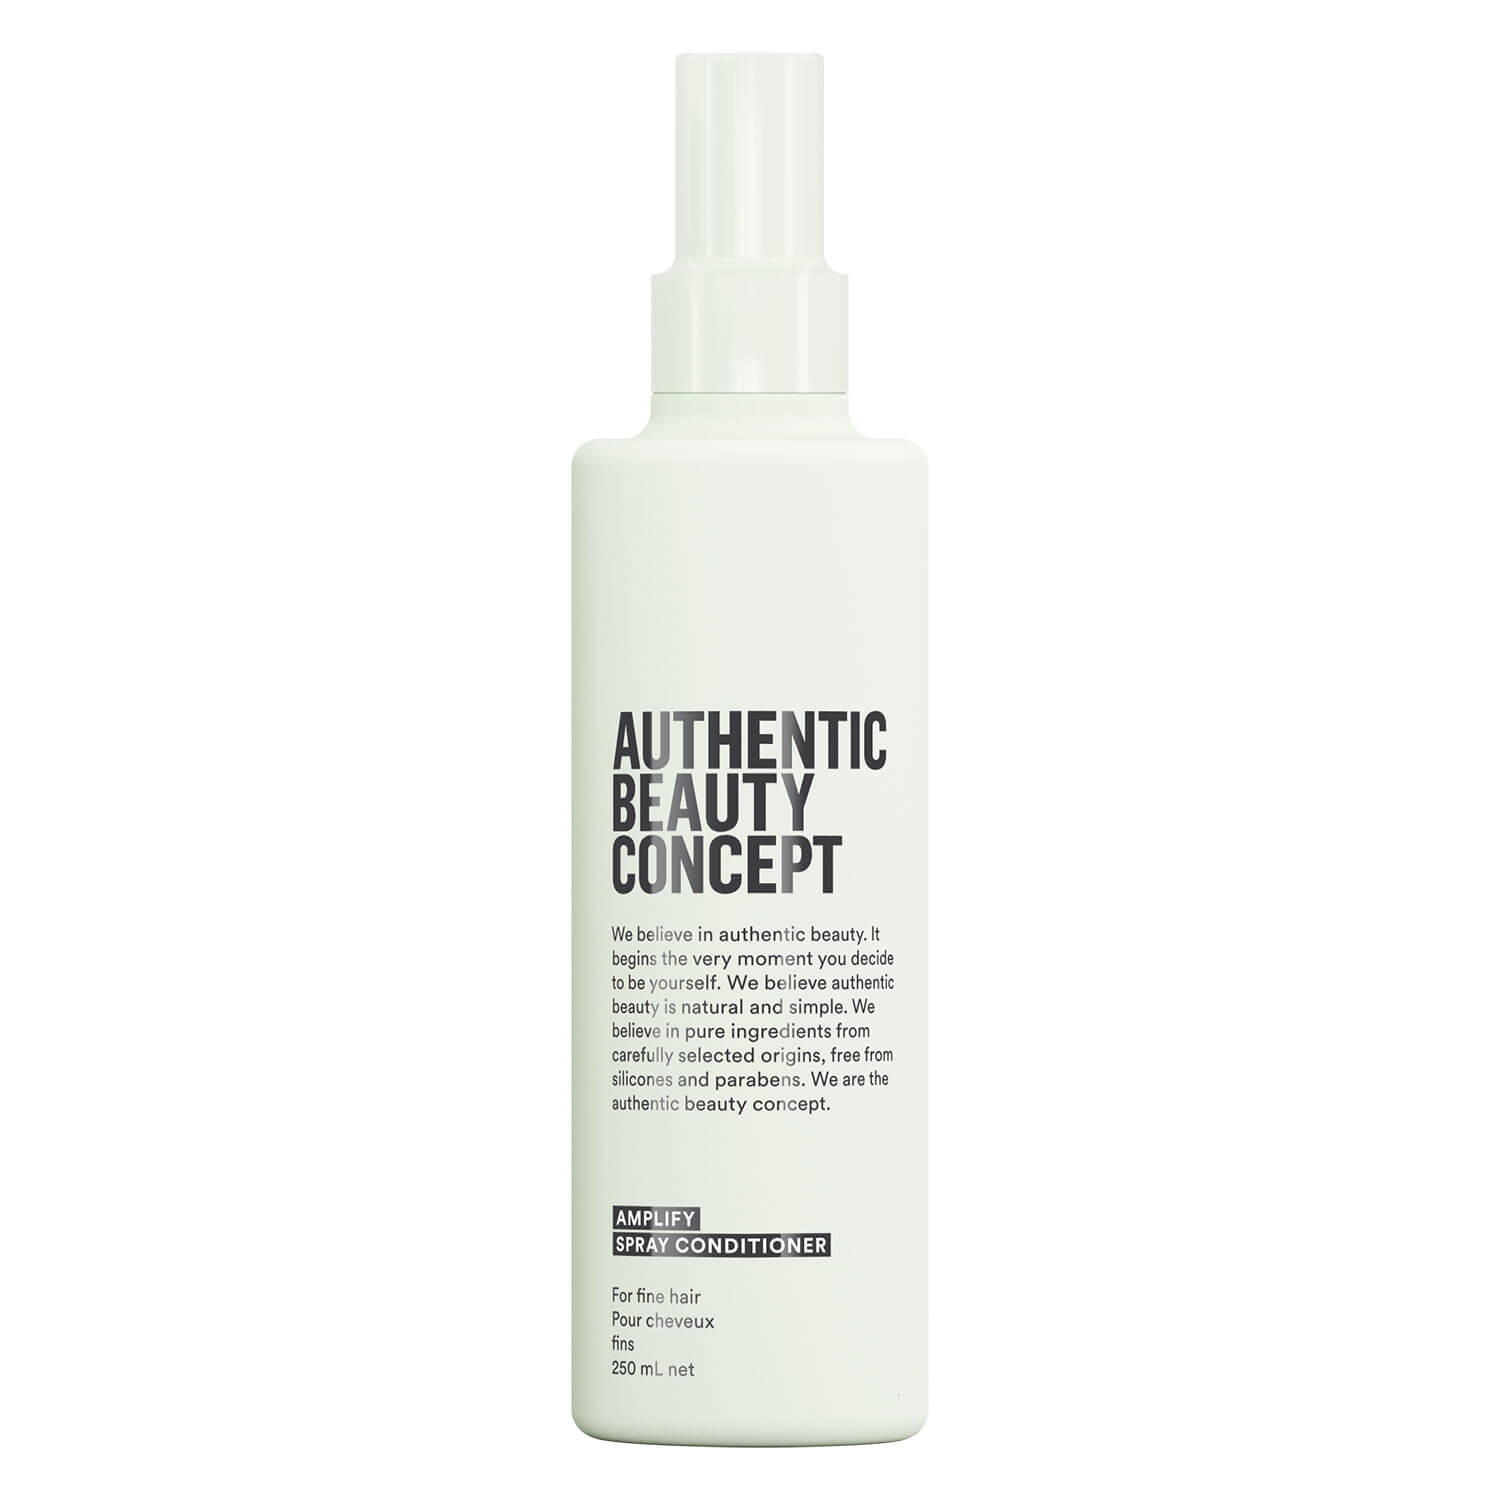 Product image from ABC Amplify - Spray Conditioner